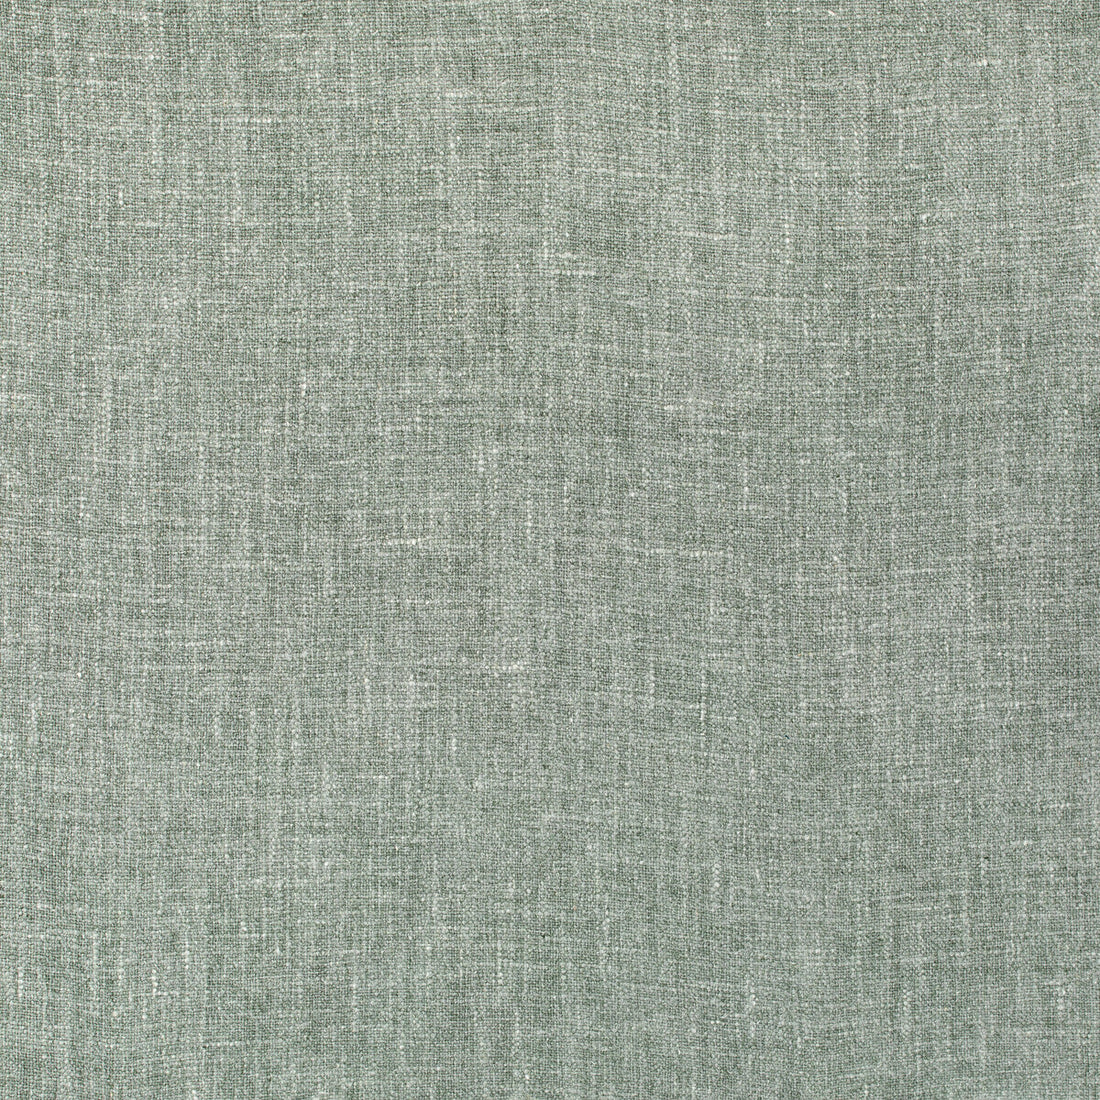 Kepala fabric in mist color - pattern 35889.13.0 - by Kravet Couture in the Atelier Weaves collection